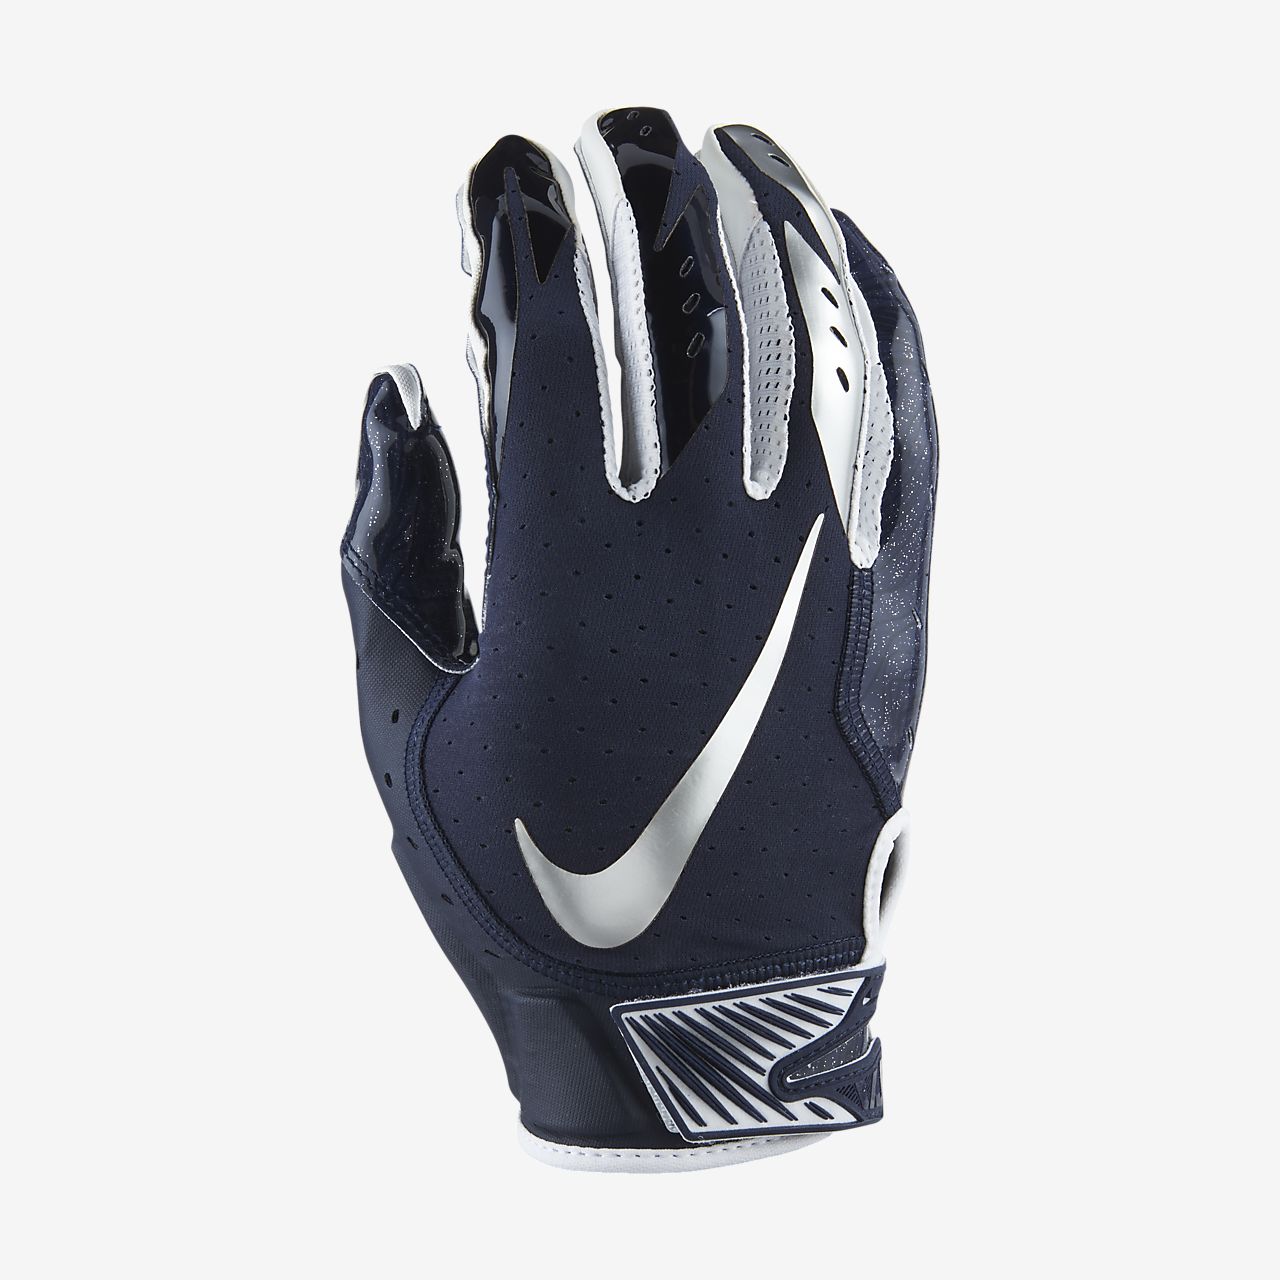 How To Tell Your Football Glove Size - Images Gloves and Descriptions ...